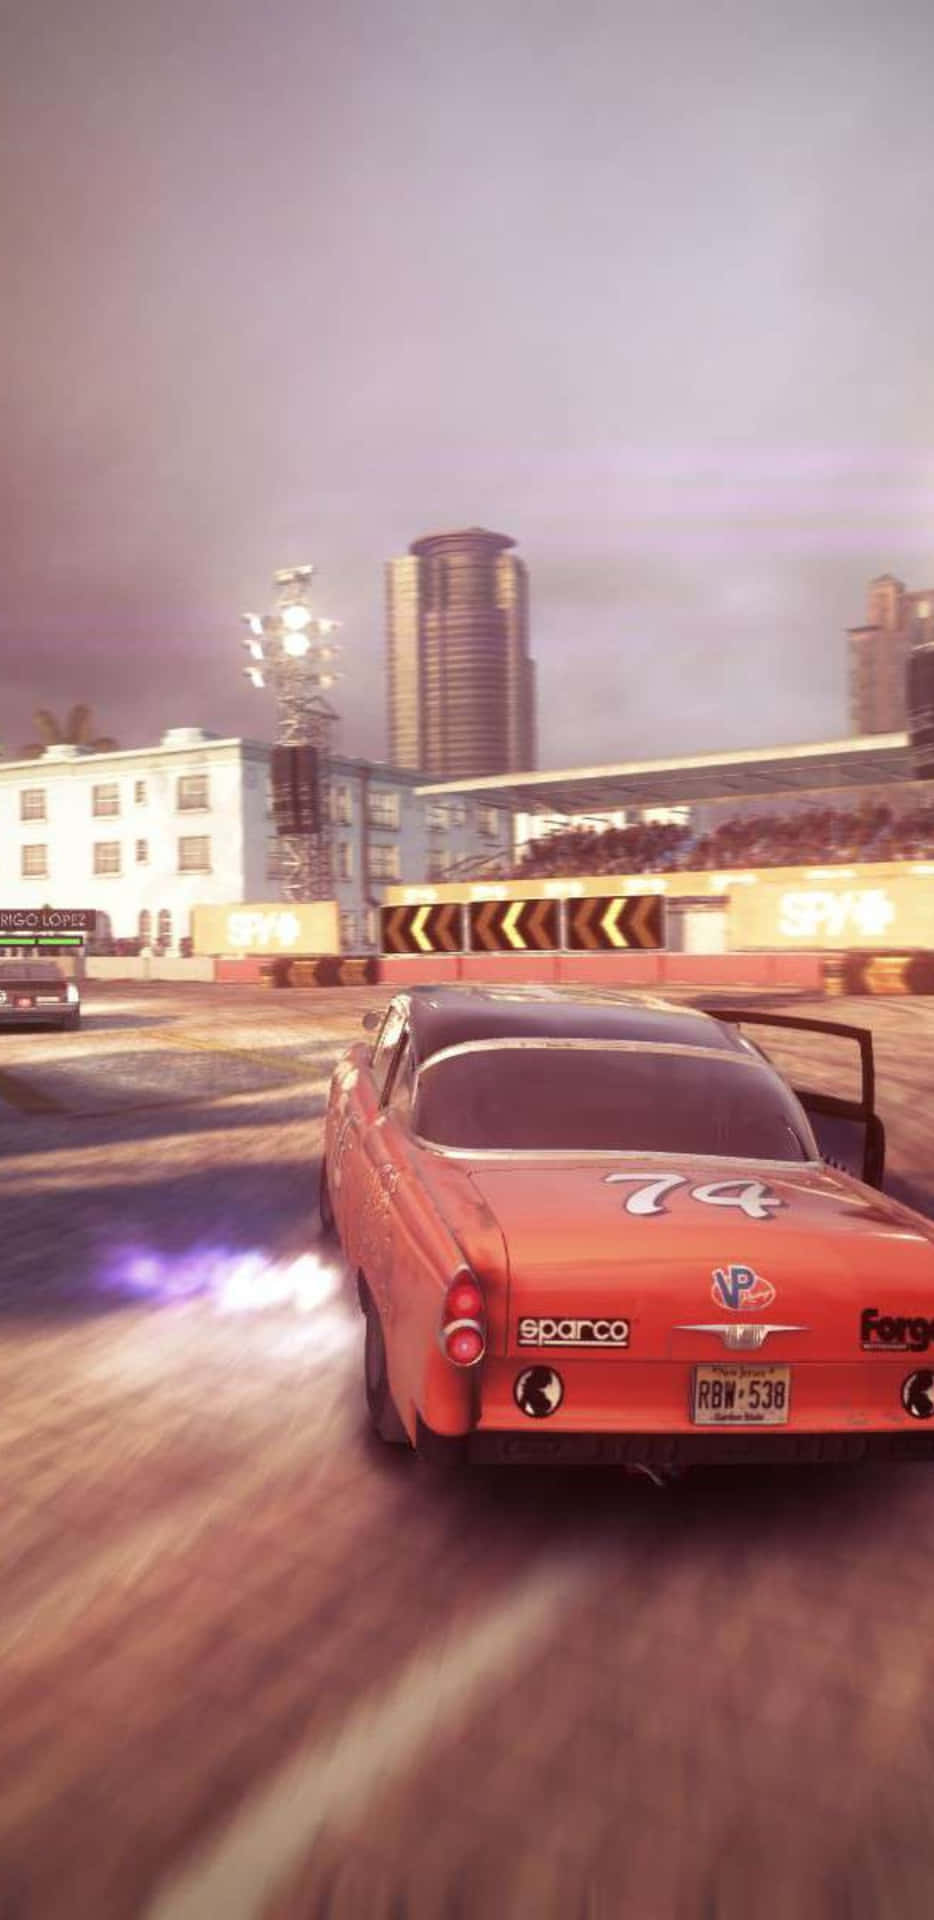 A Screenshot Of A Racing Game With A Red Car